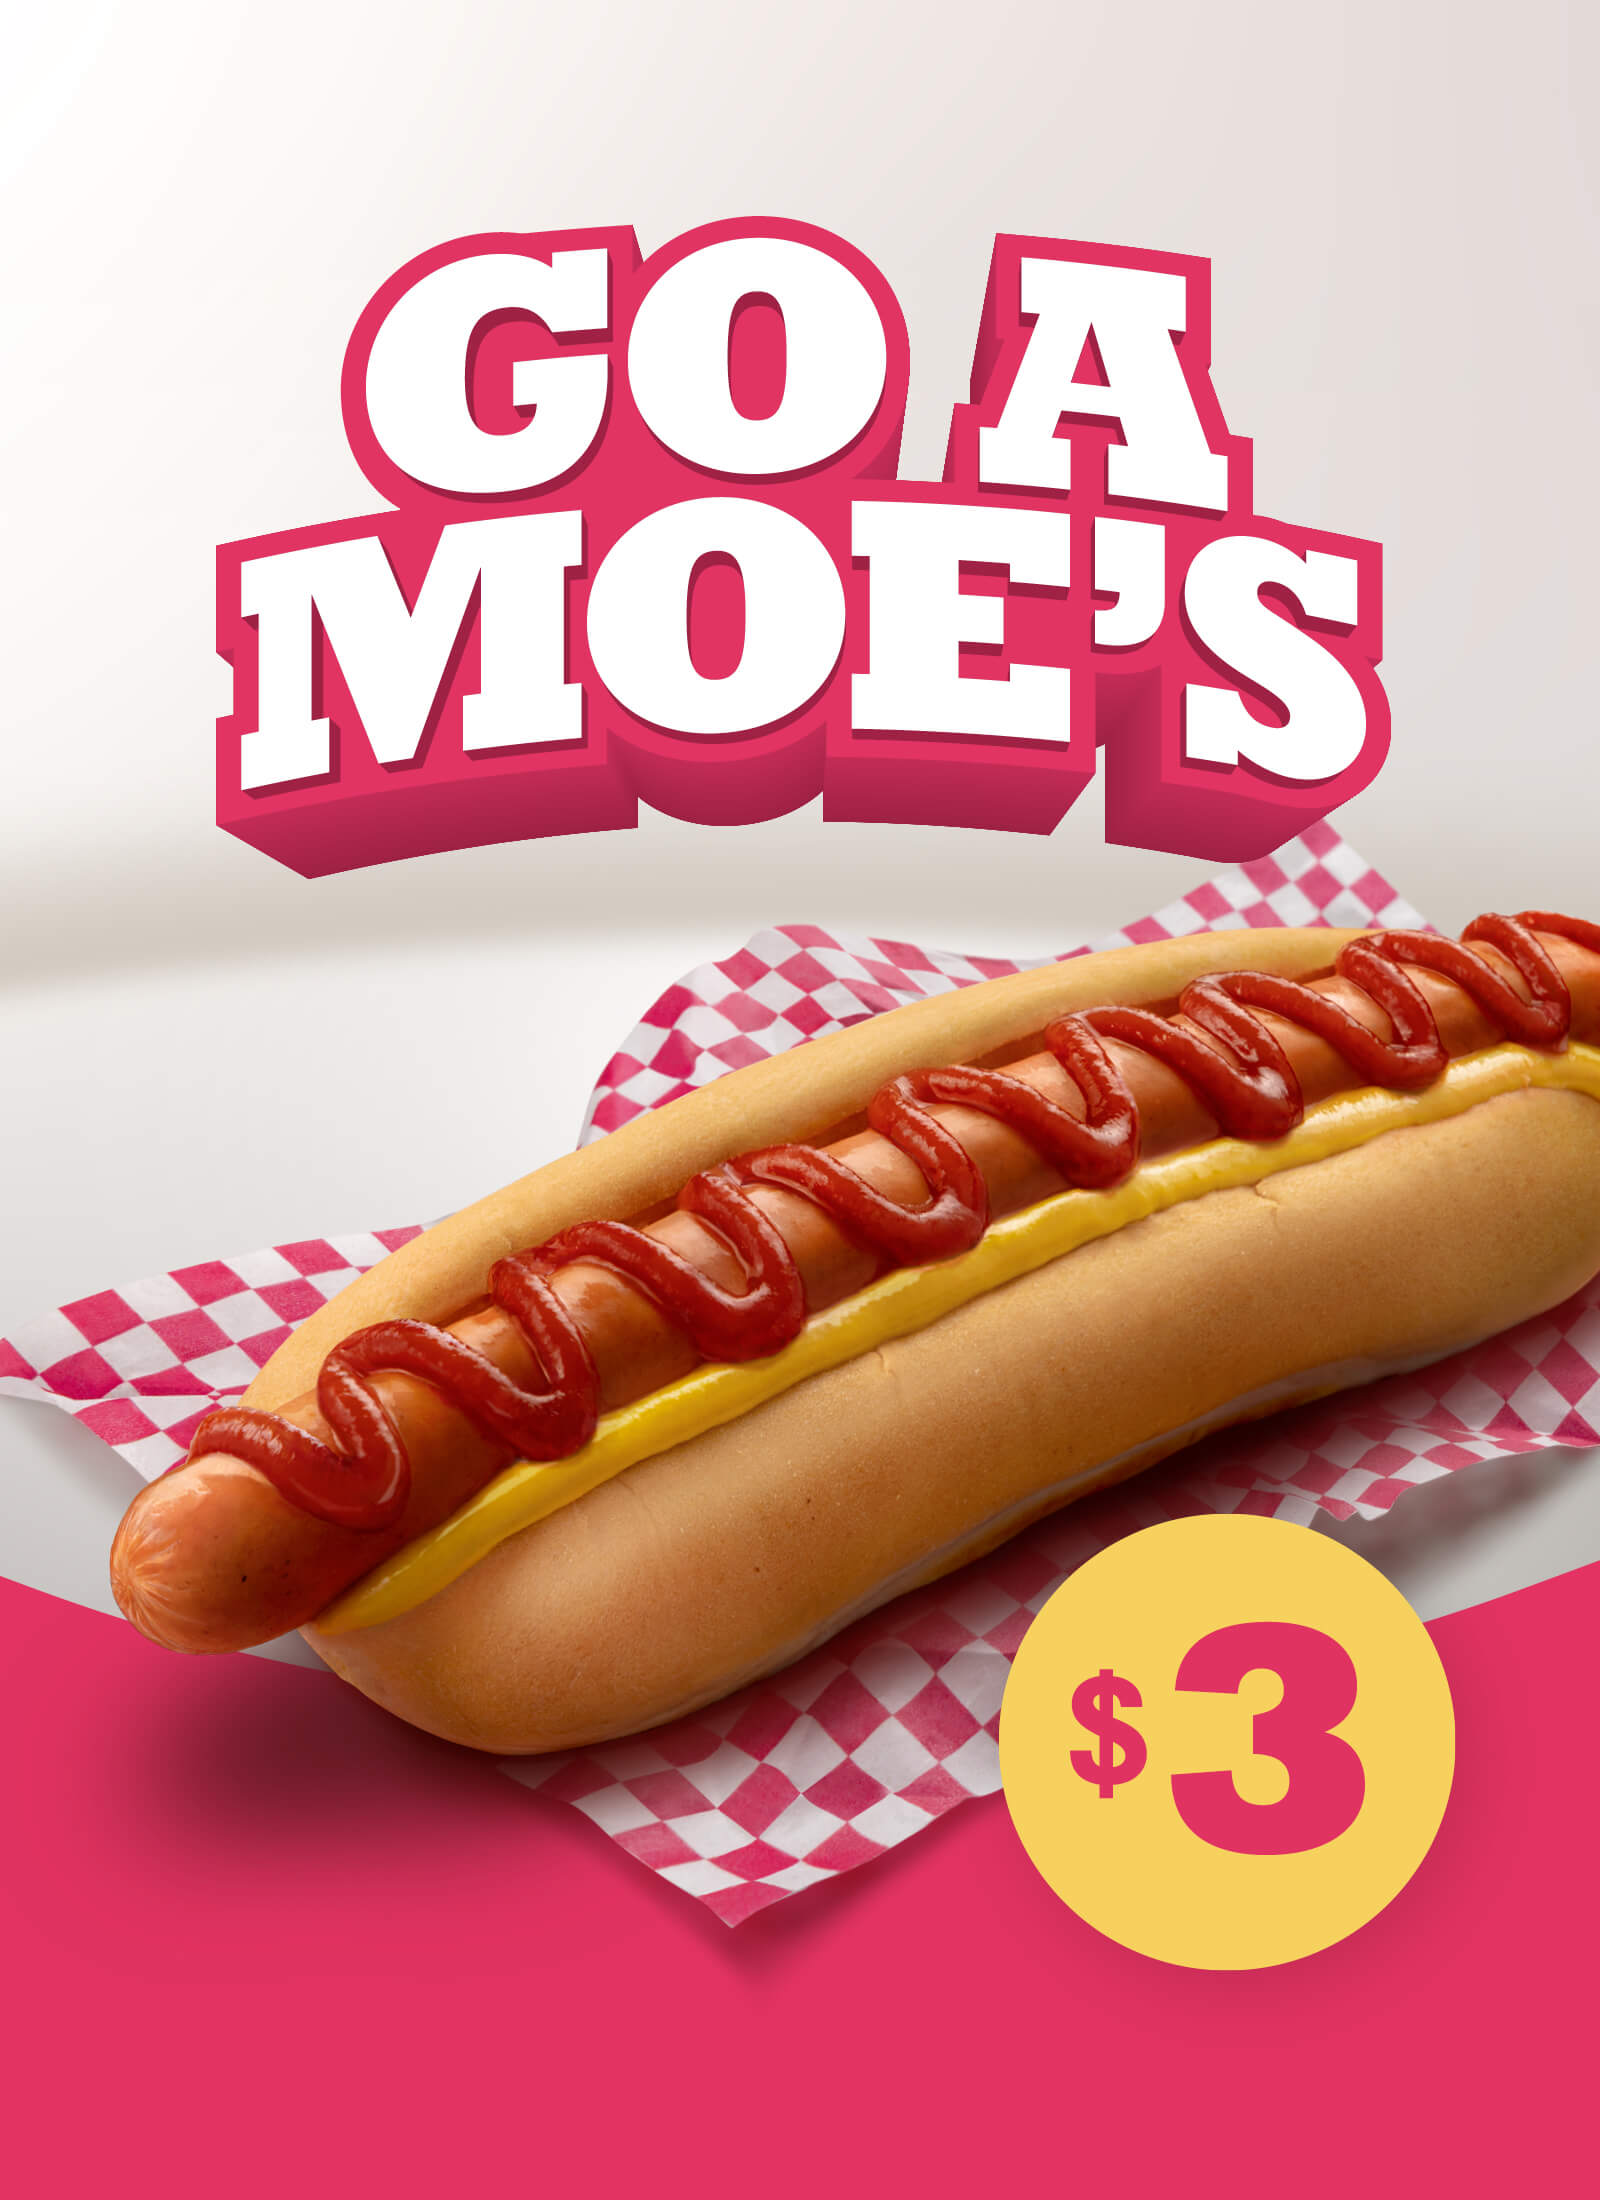 Moe’s New York style hot dog features a mouth-watering frankfurt, with your choice of sauce, mustard, cheese, bacon, caramelised onion and a relish to die for